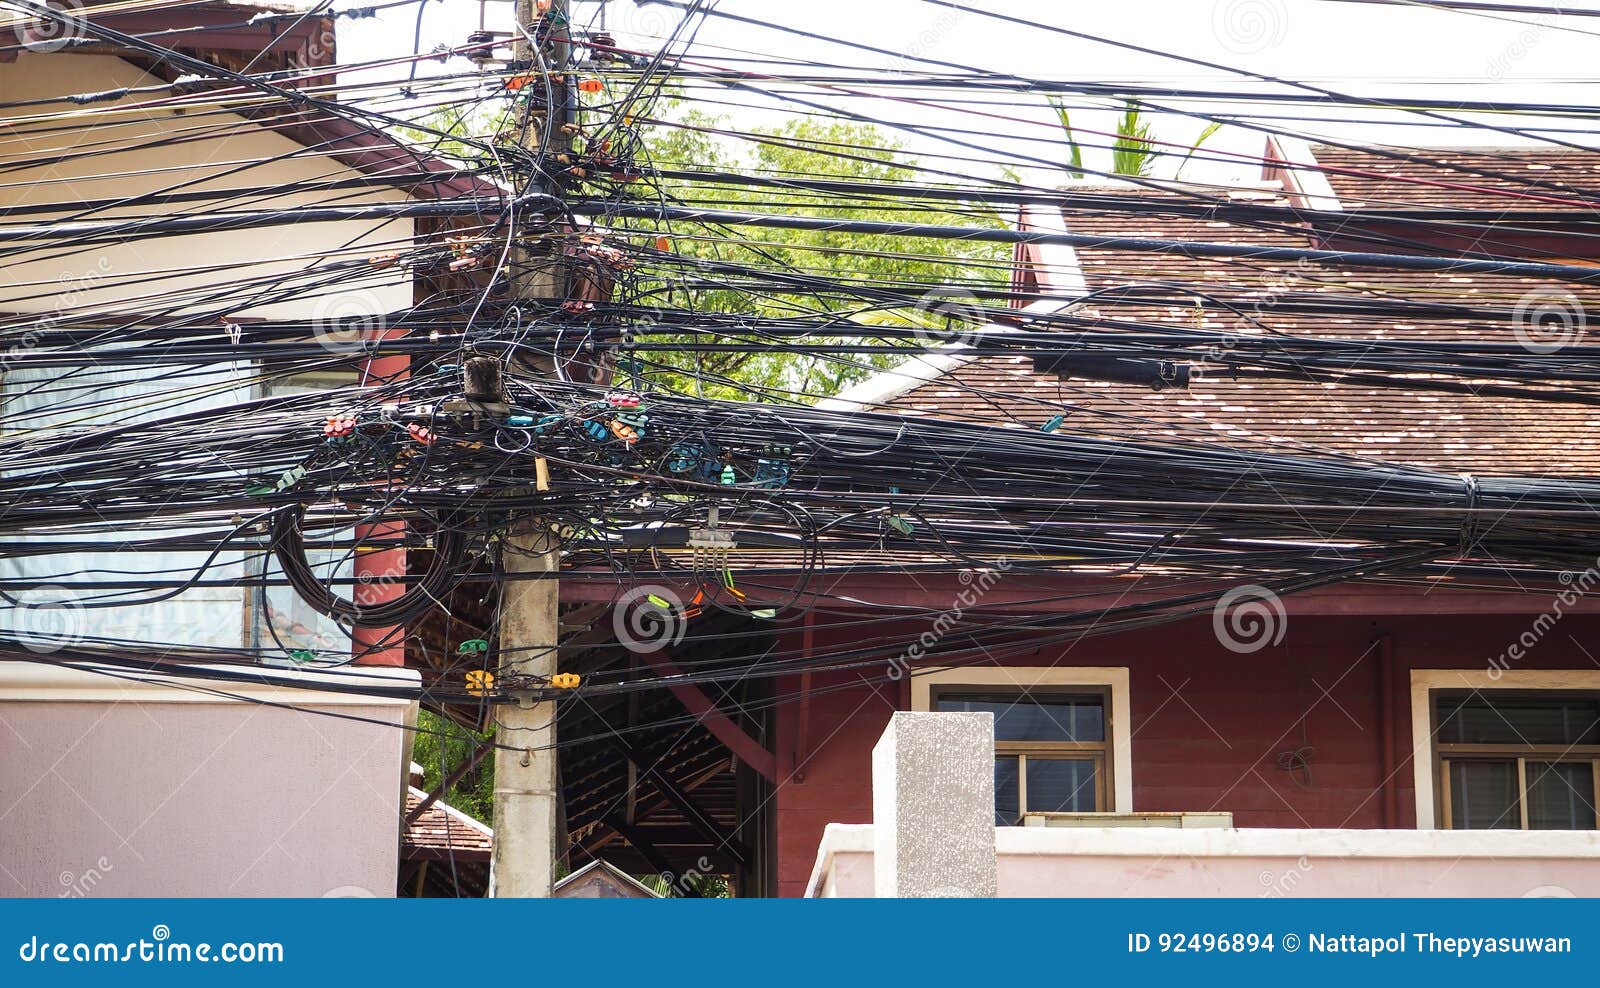 the complexity of the cable wire on street of samui, thailand